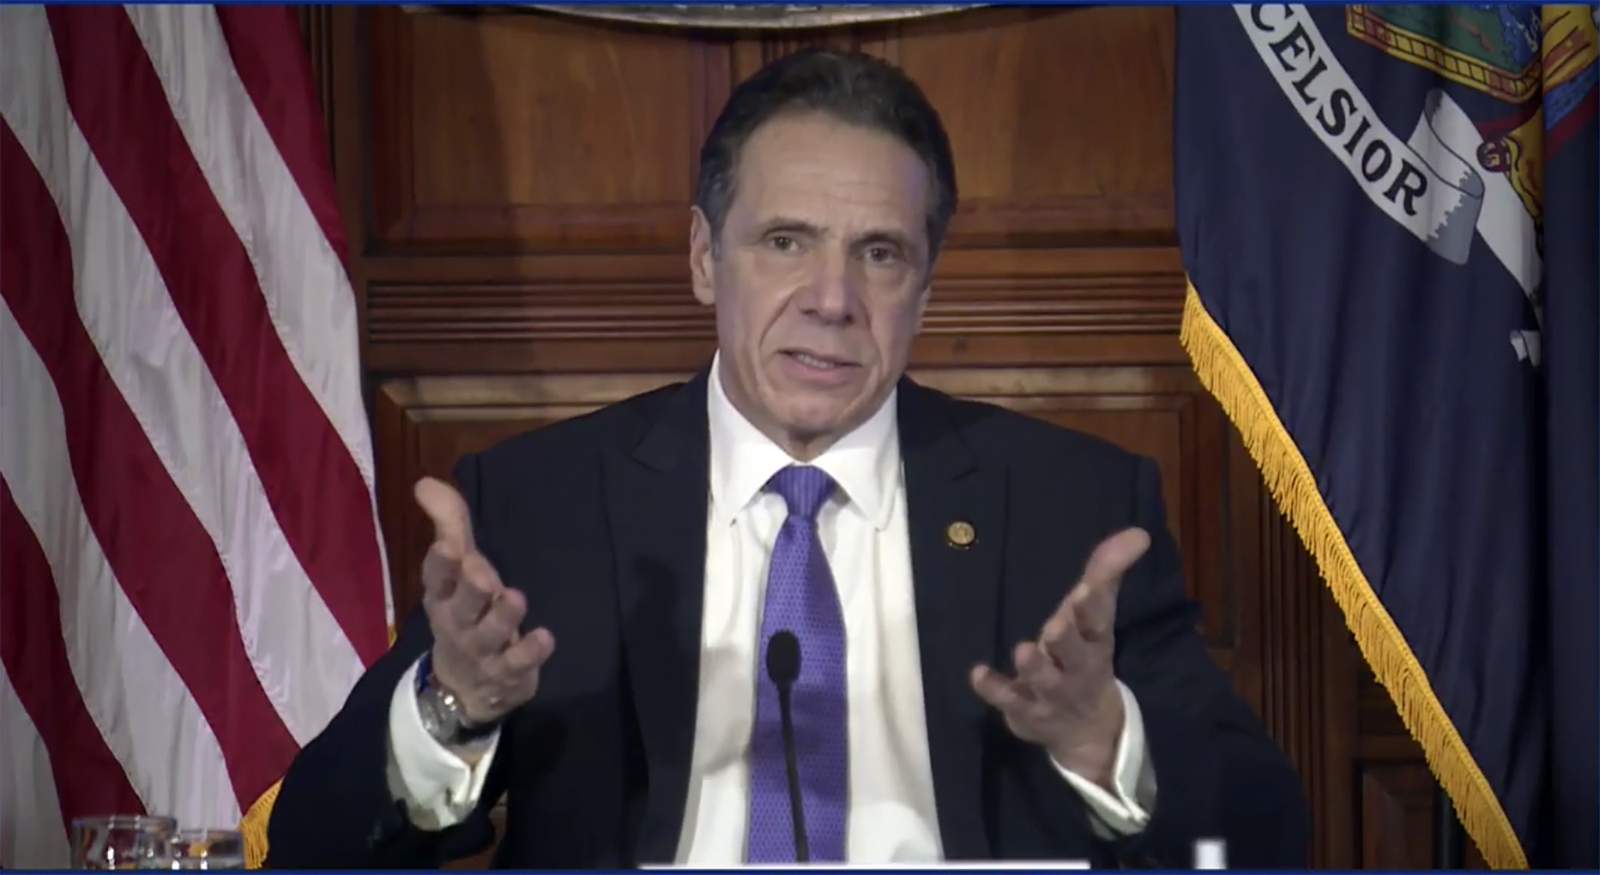 Another ex-aide calls Cuomo's office conduct inappropriate